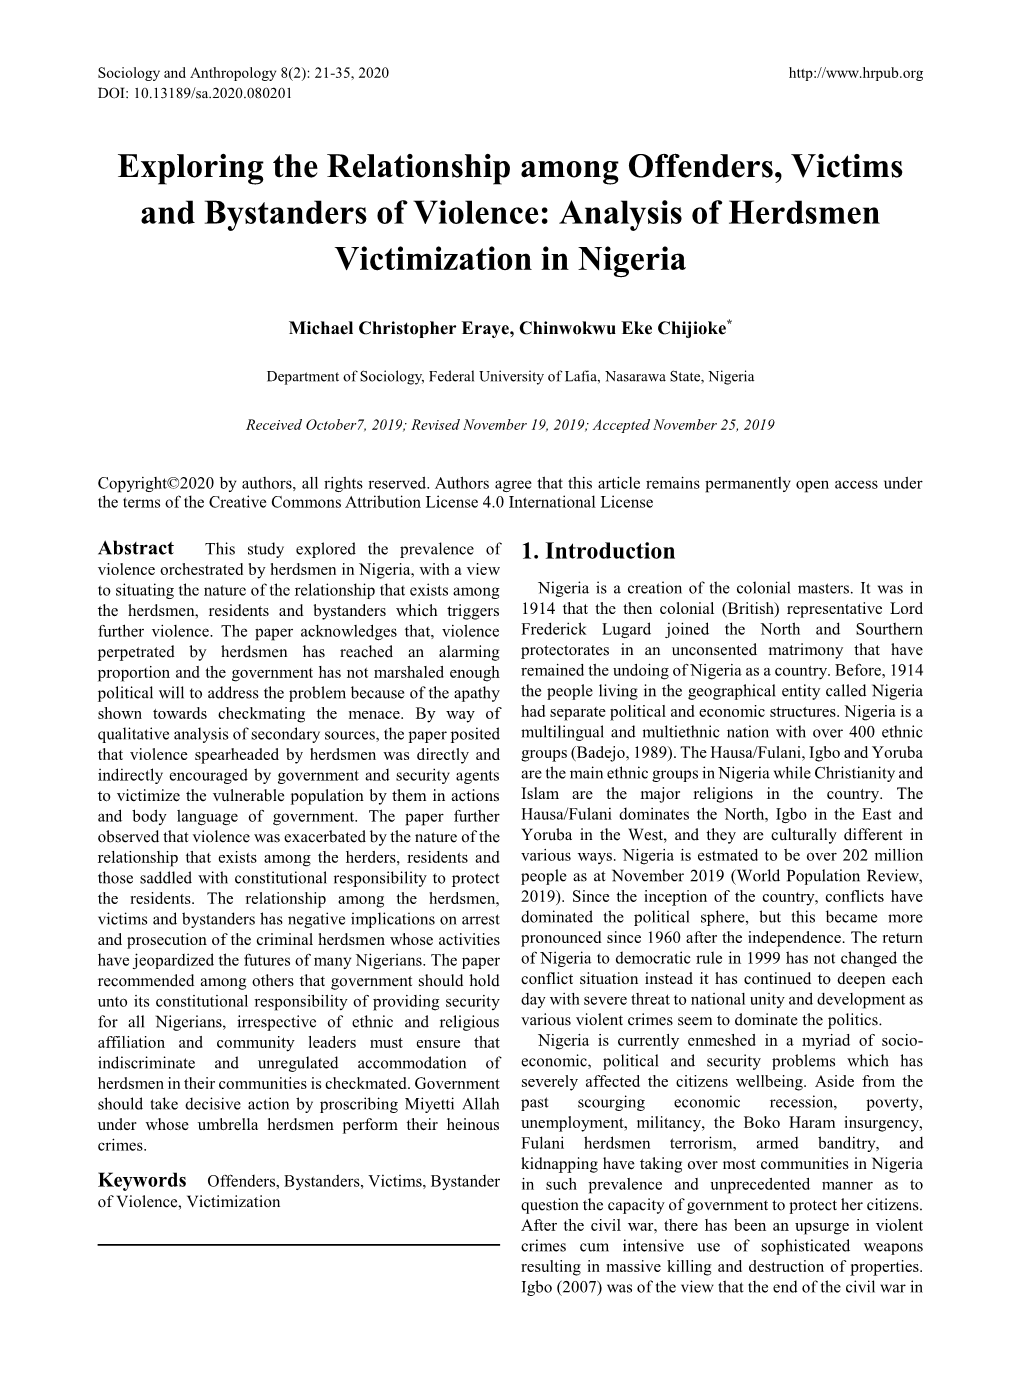 Exploring the Relationship Among Offenders, Victims and Bystanders of Violence: Analysis of Herdsmen Victimization in Nigeria